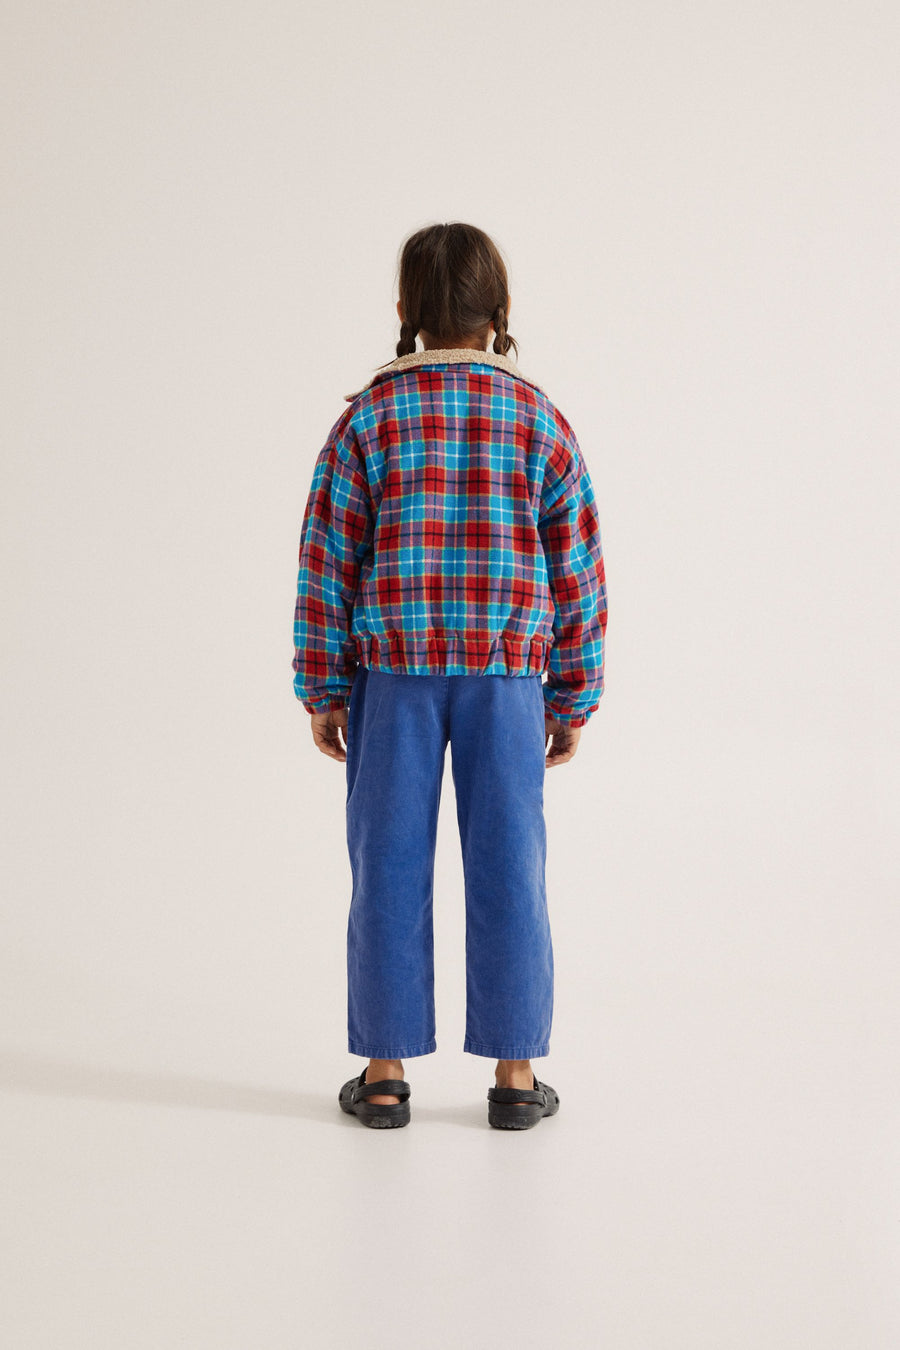 The Campamento - Red & blue checked kids jacket - blue